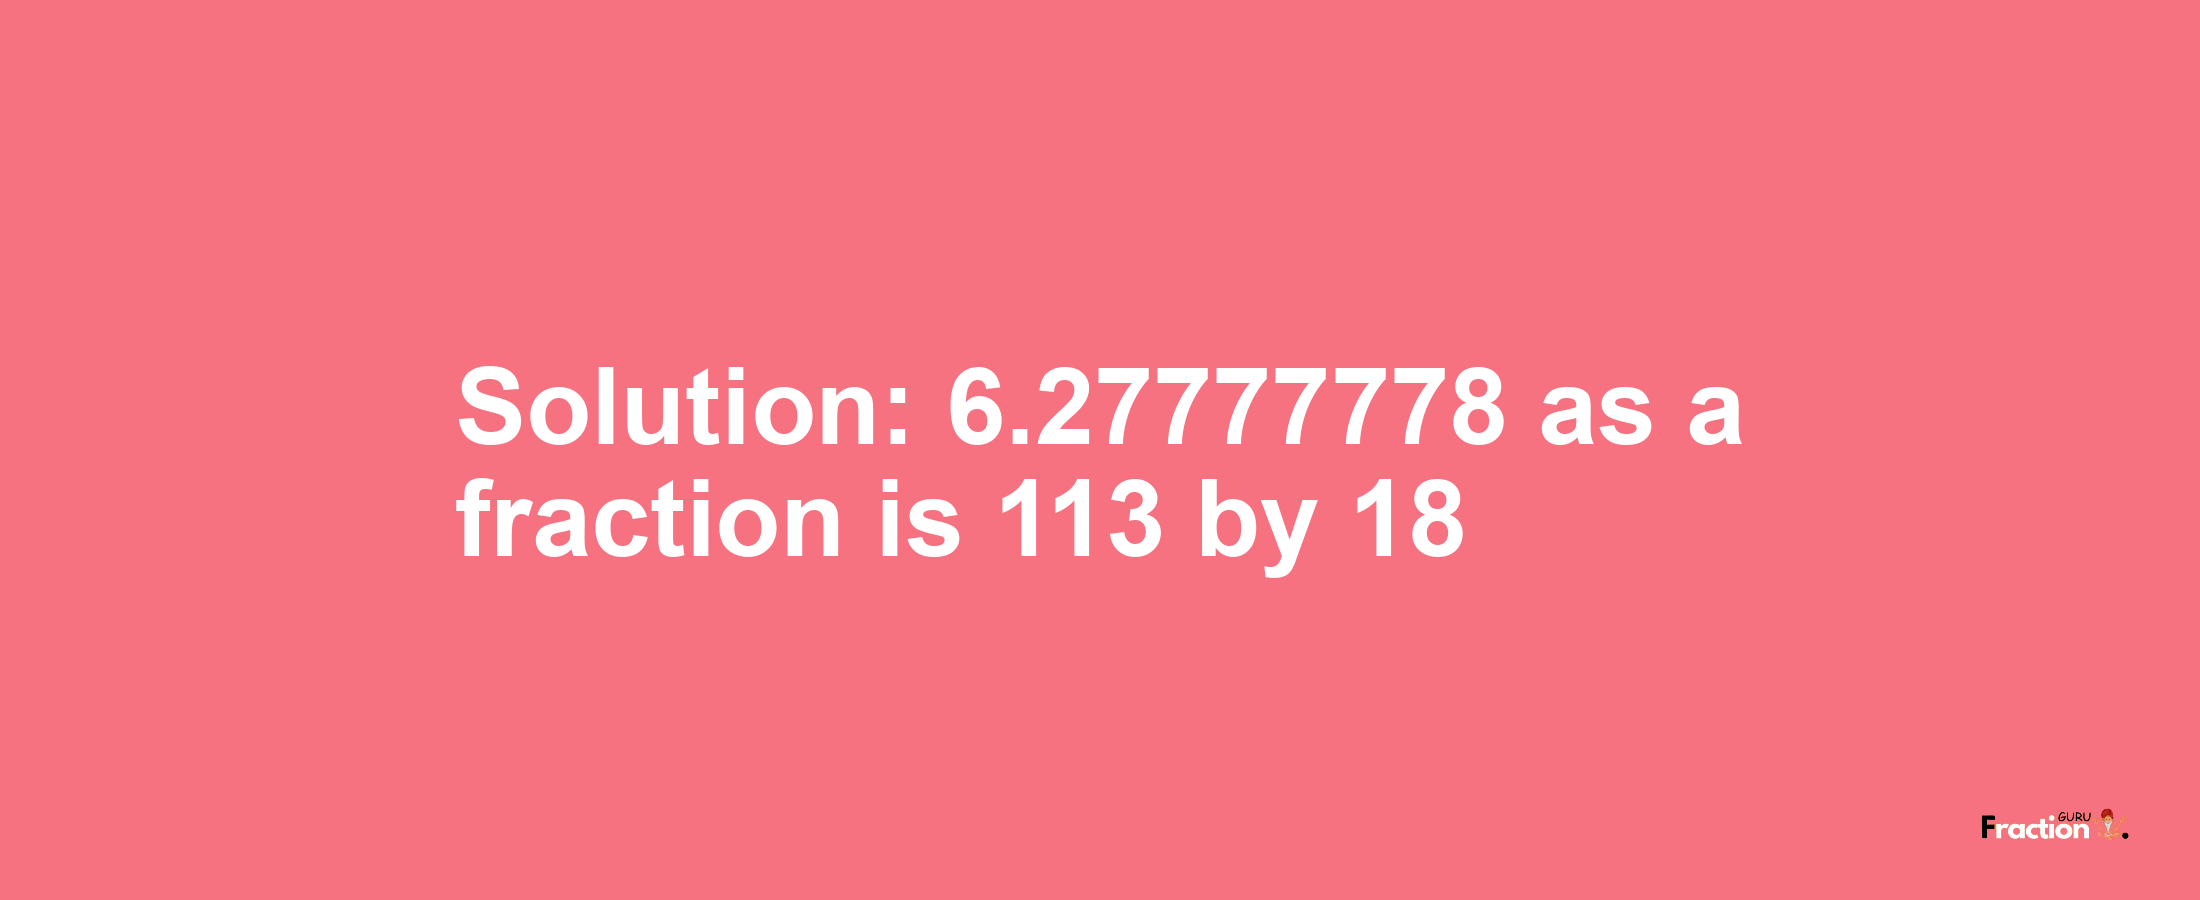 Solution:6.27777778 as a fraction is 113/18